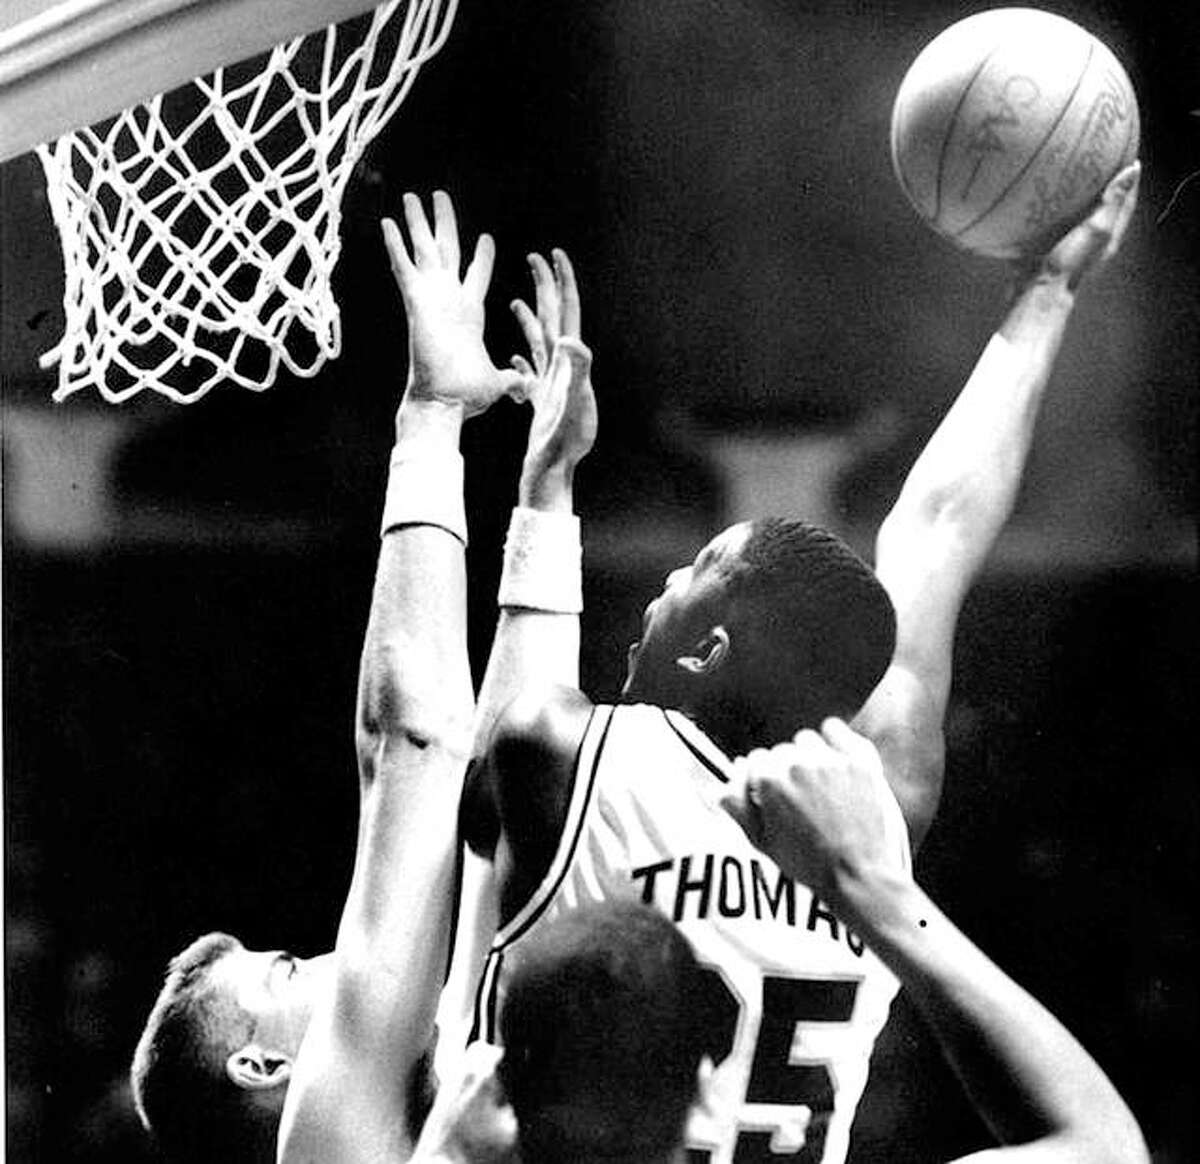 Former Illinois standout Deon Thomas puts up a shot during his playing days in Champaign. Thomas, who later was the athletic director and men’s basketball coach at Lewis and Clark Community College, will be inducted into the Illini Hall of Fame this year.